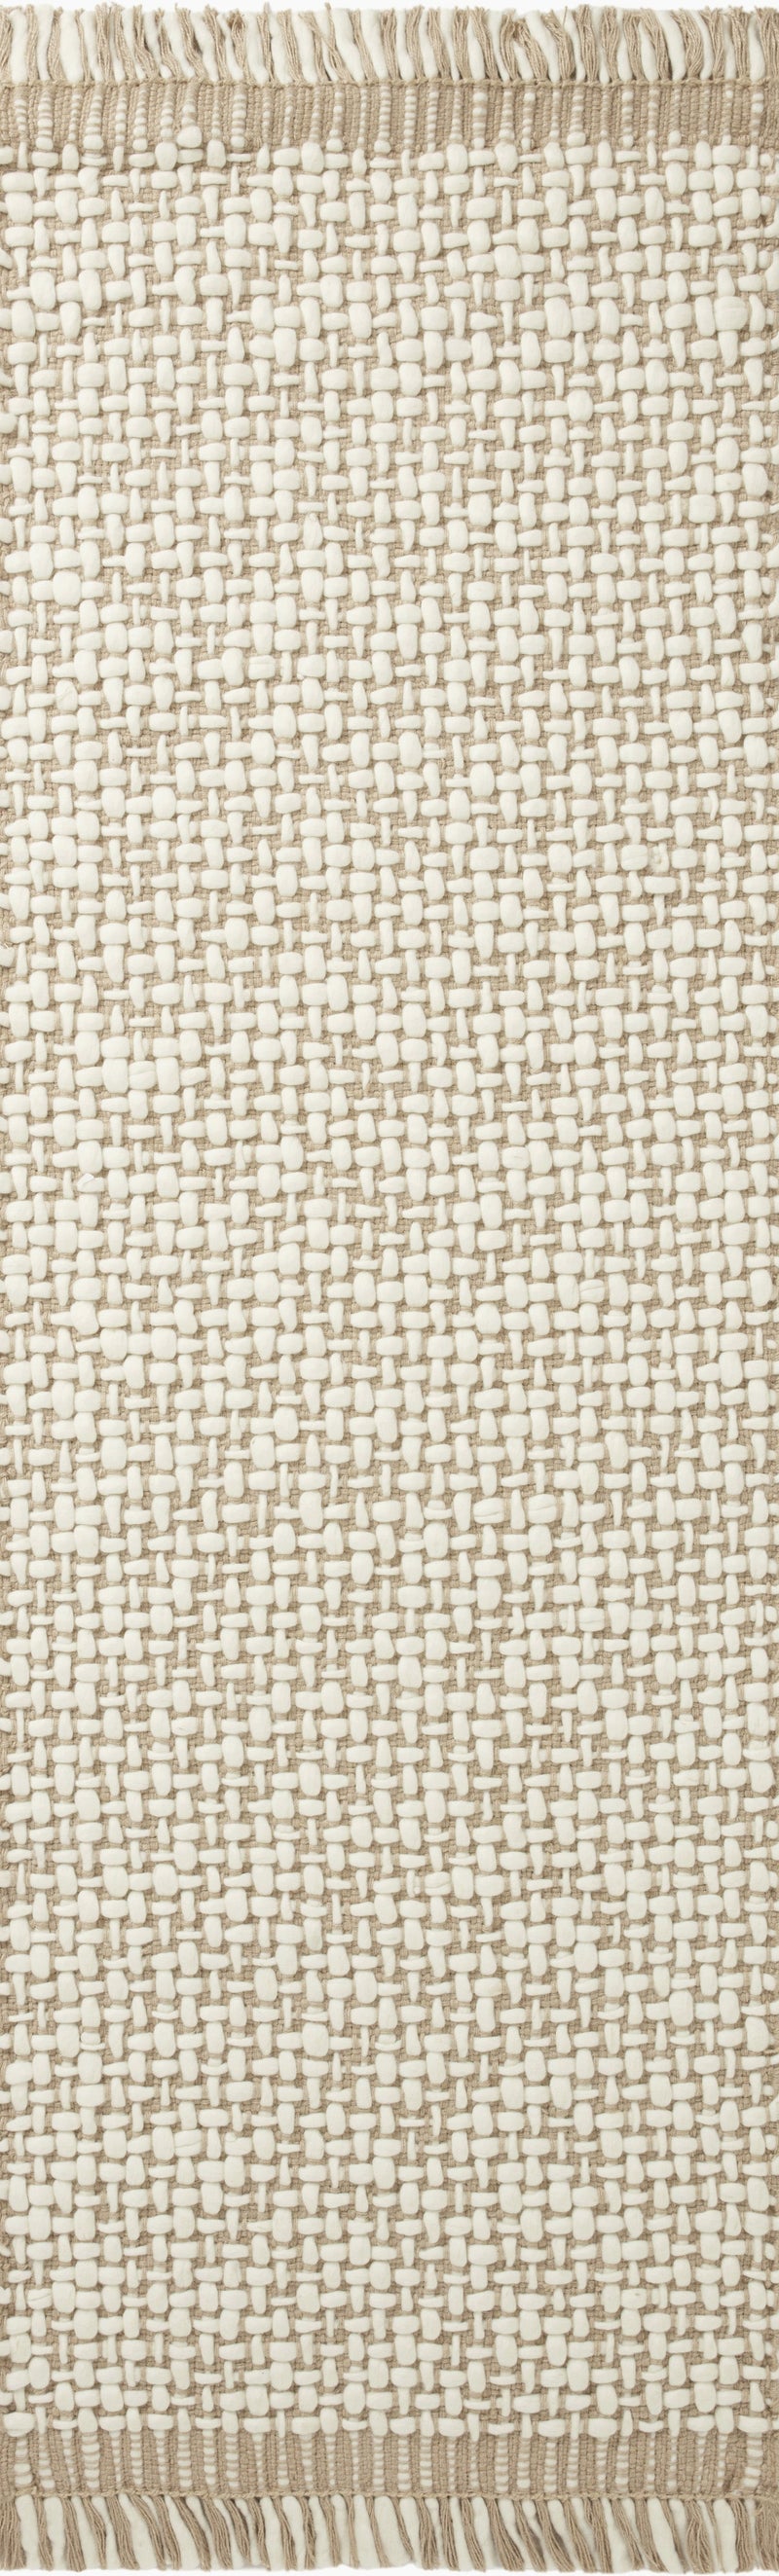 media image for Yellowstone Hand Woven Natural Ivory Rug By Amber Lewis X Loloi Yeloyel 01Naivb6F0 2 241